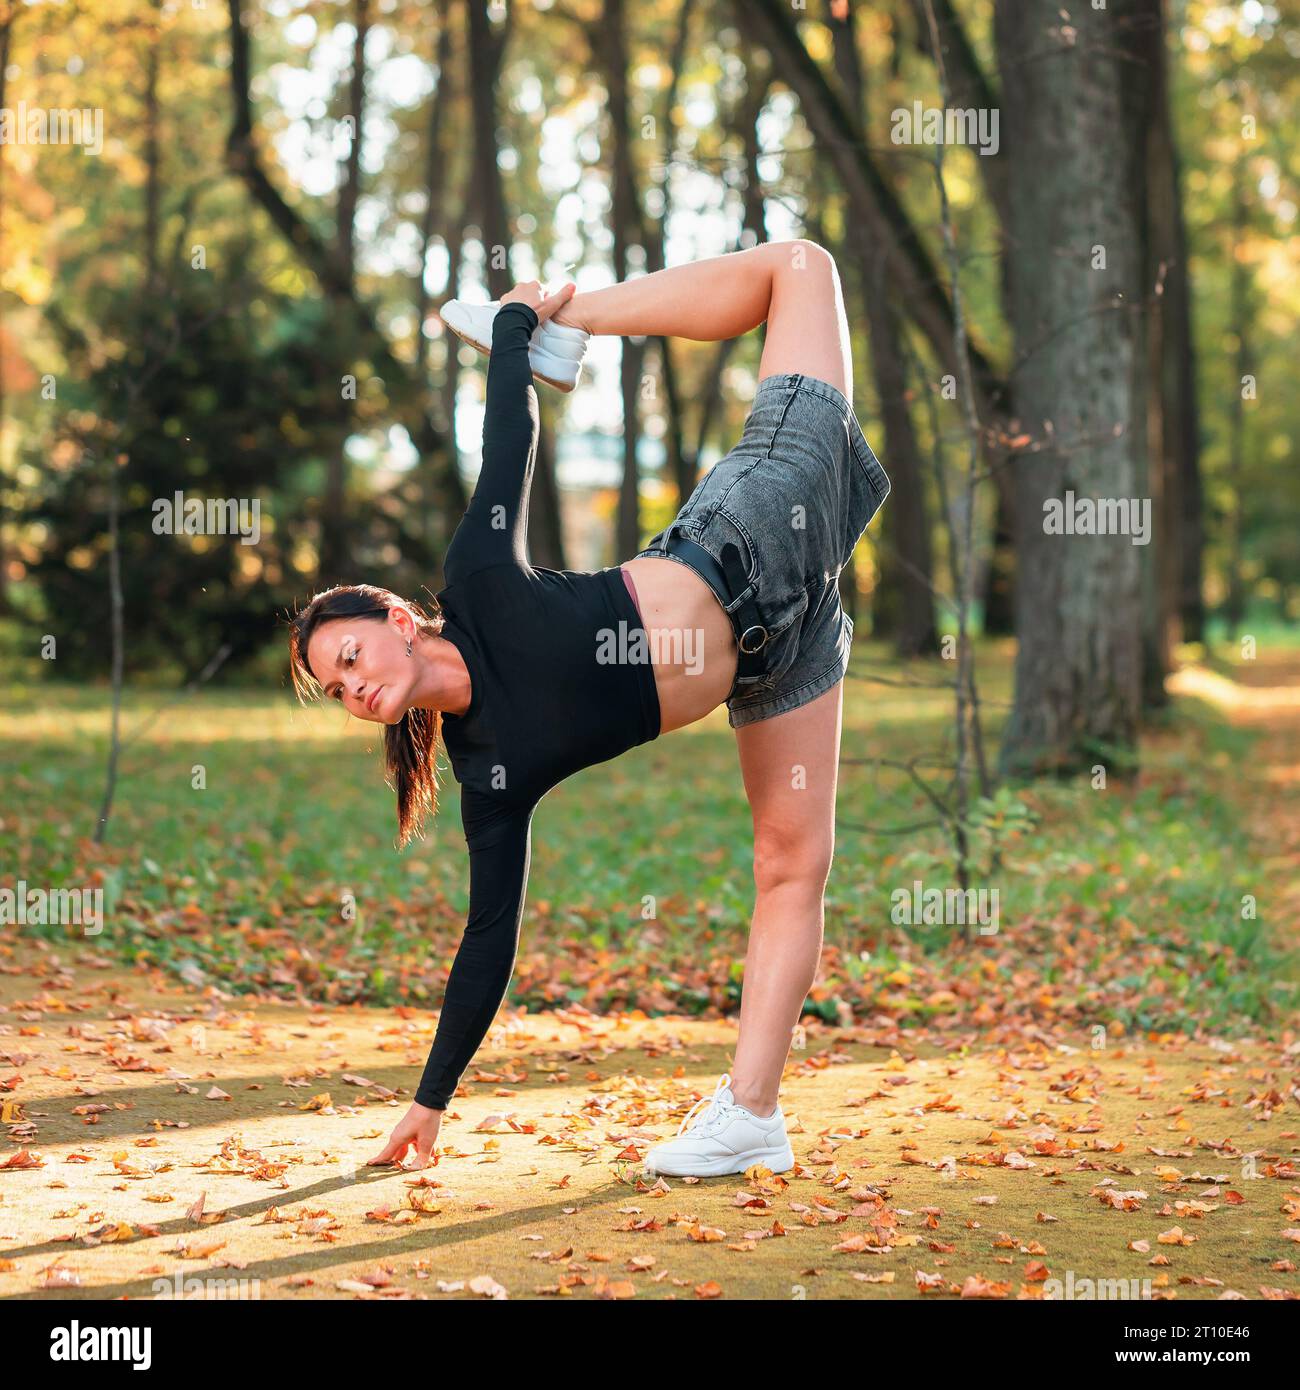 A woman practicing yoga performs a variation of the Ardha Chandrasana exercise, crescent pose, training while standing on a sunny warm autumn day in t Stock Photo